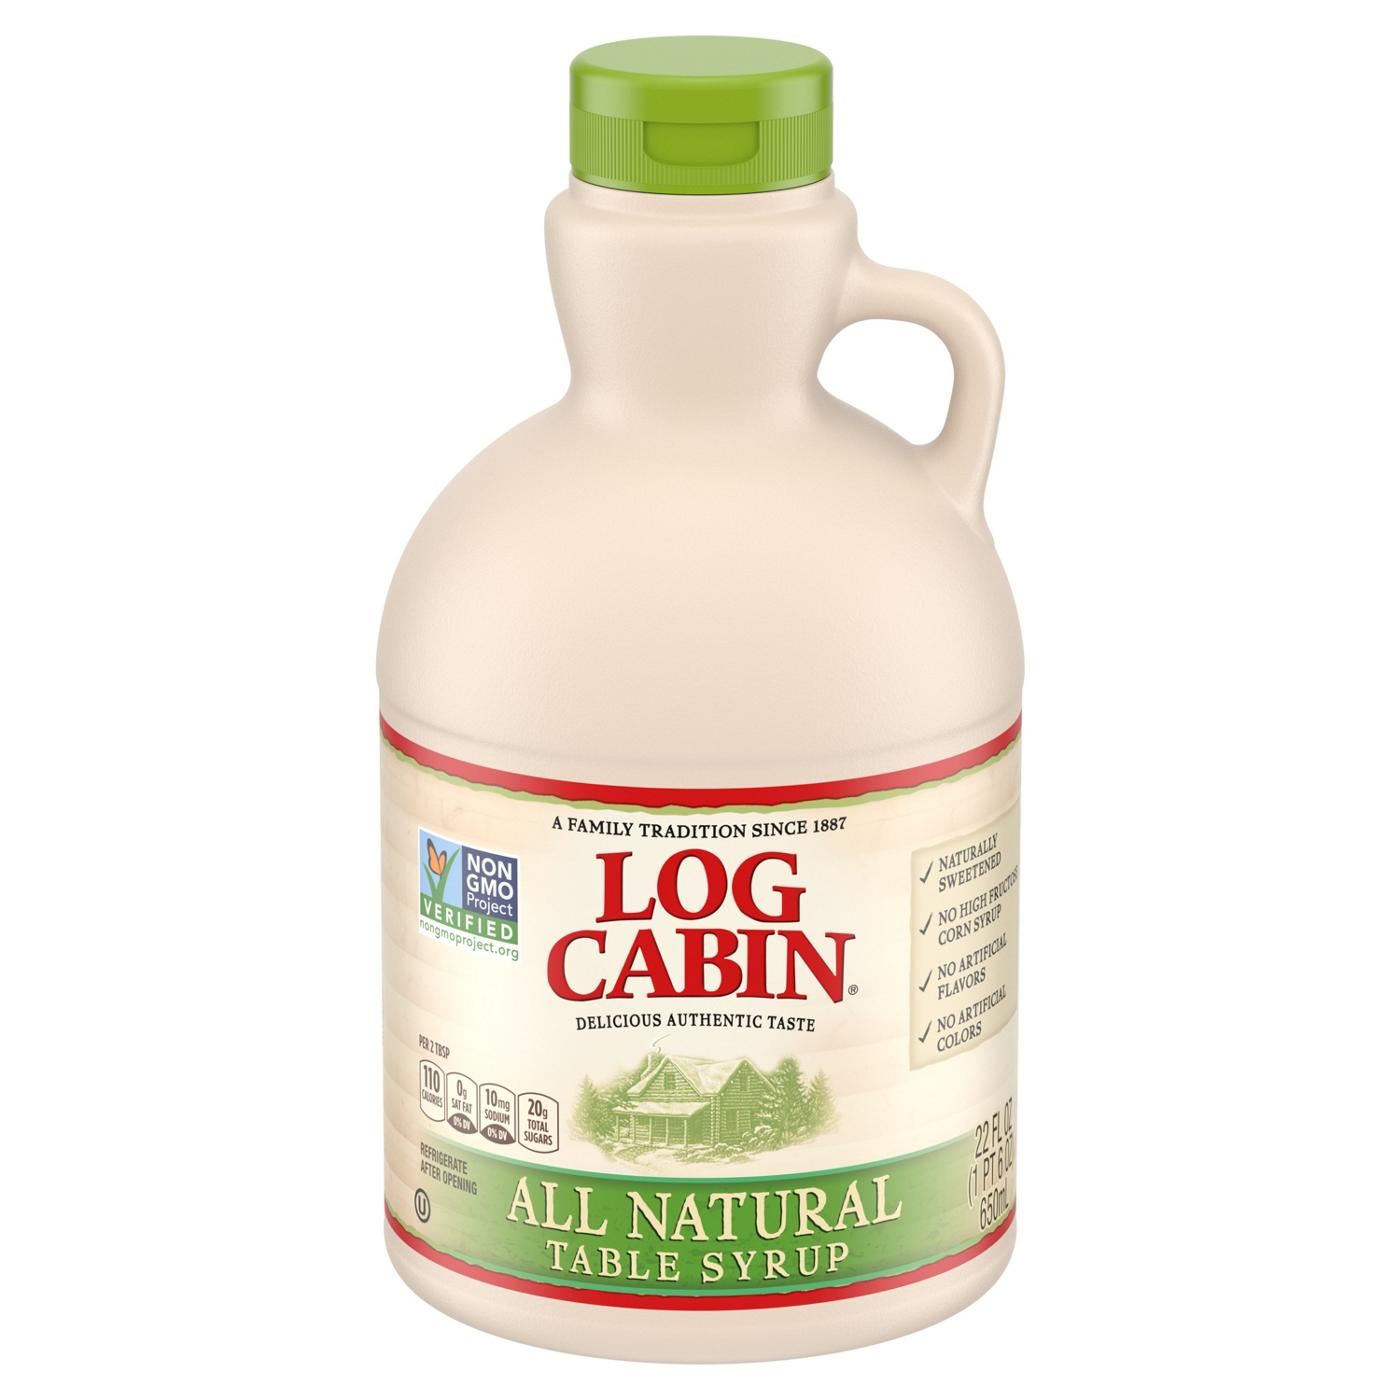 Log Cabin All Natural Table Syrup; image 1 of 4